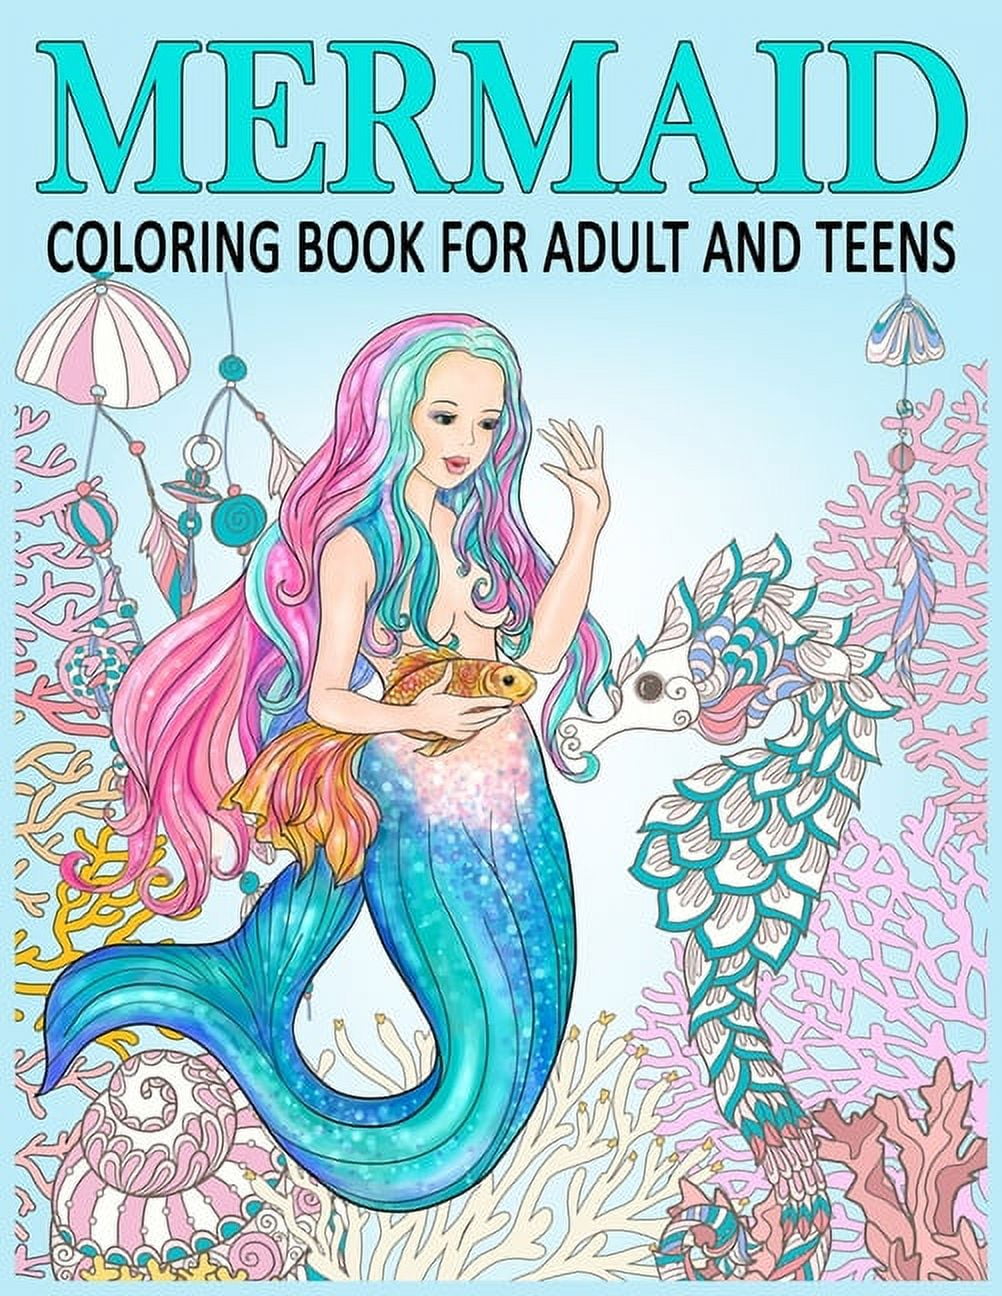 Princesses as Mermaids: Coloring Book & Art Book in One: Relaxing Coloring  Book for Teens and Adults: 9781990698576: Yu, Mei: Books 